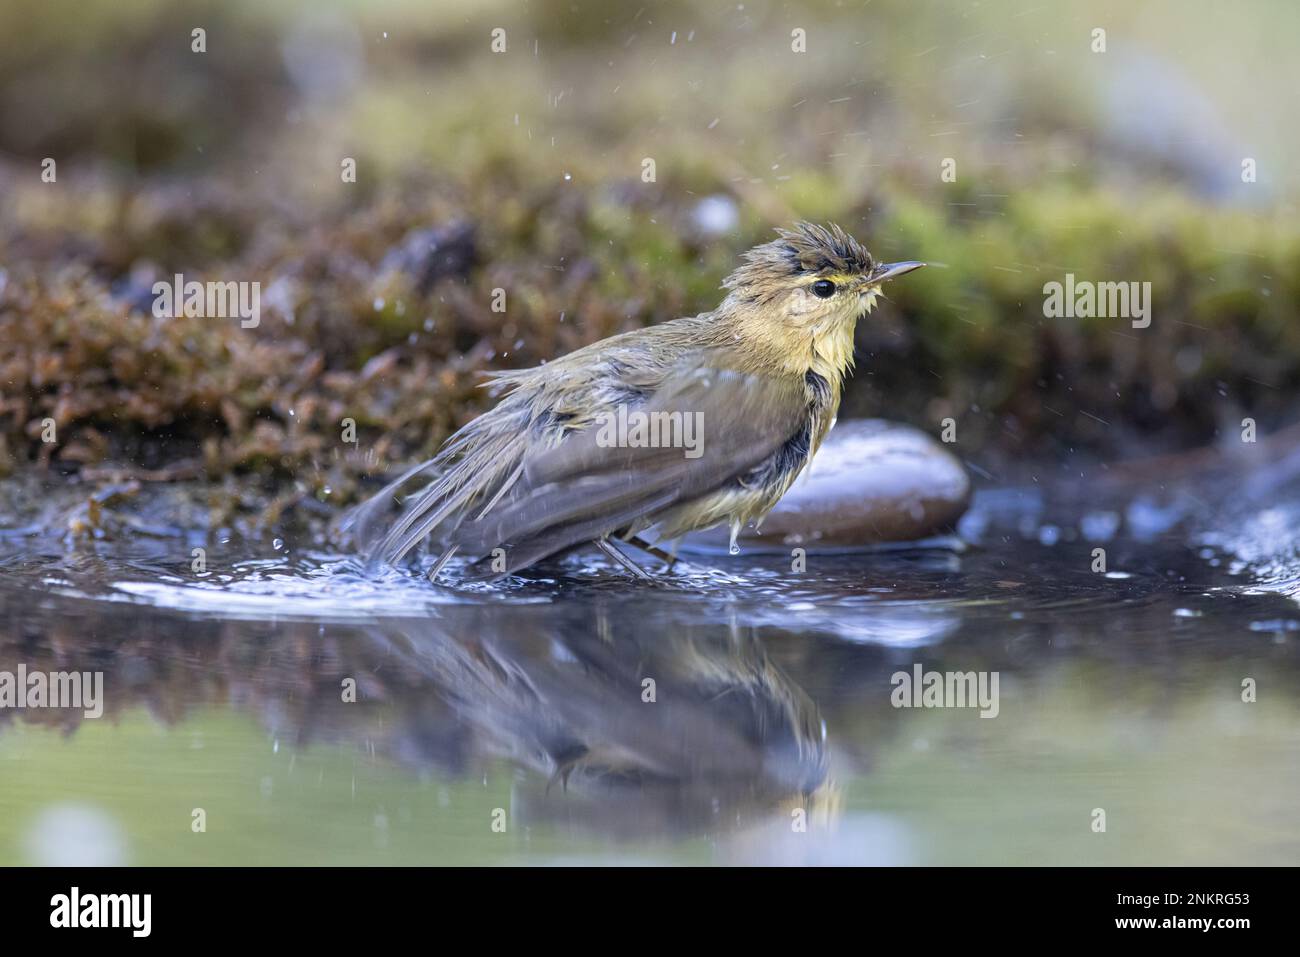 Wood warbler, Phylloscopus sibilatrix. a beautiful bird swims and looks at the reflection in the water Stock Photo